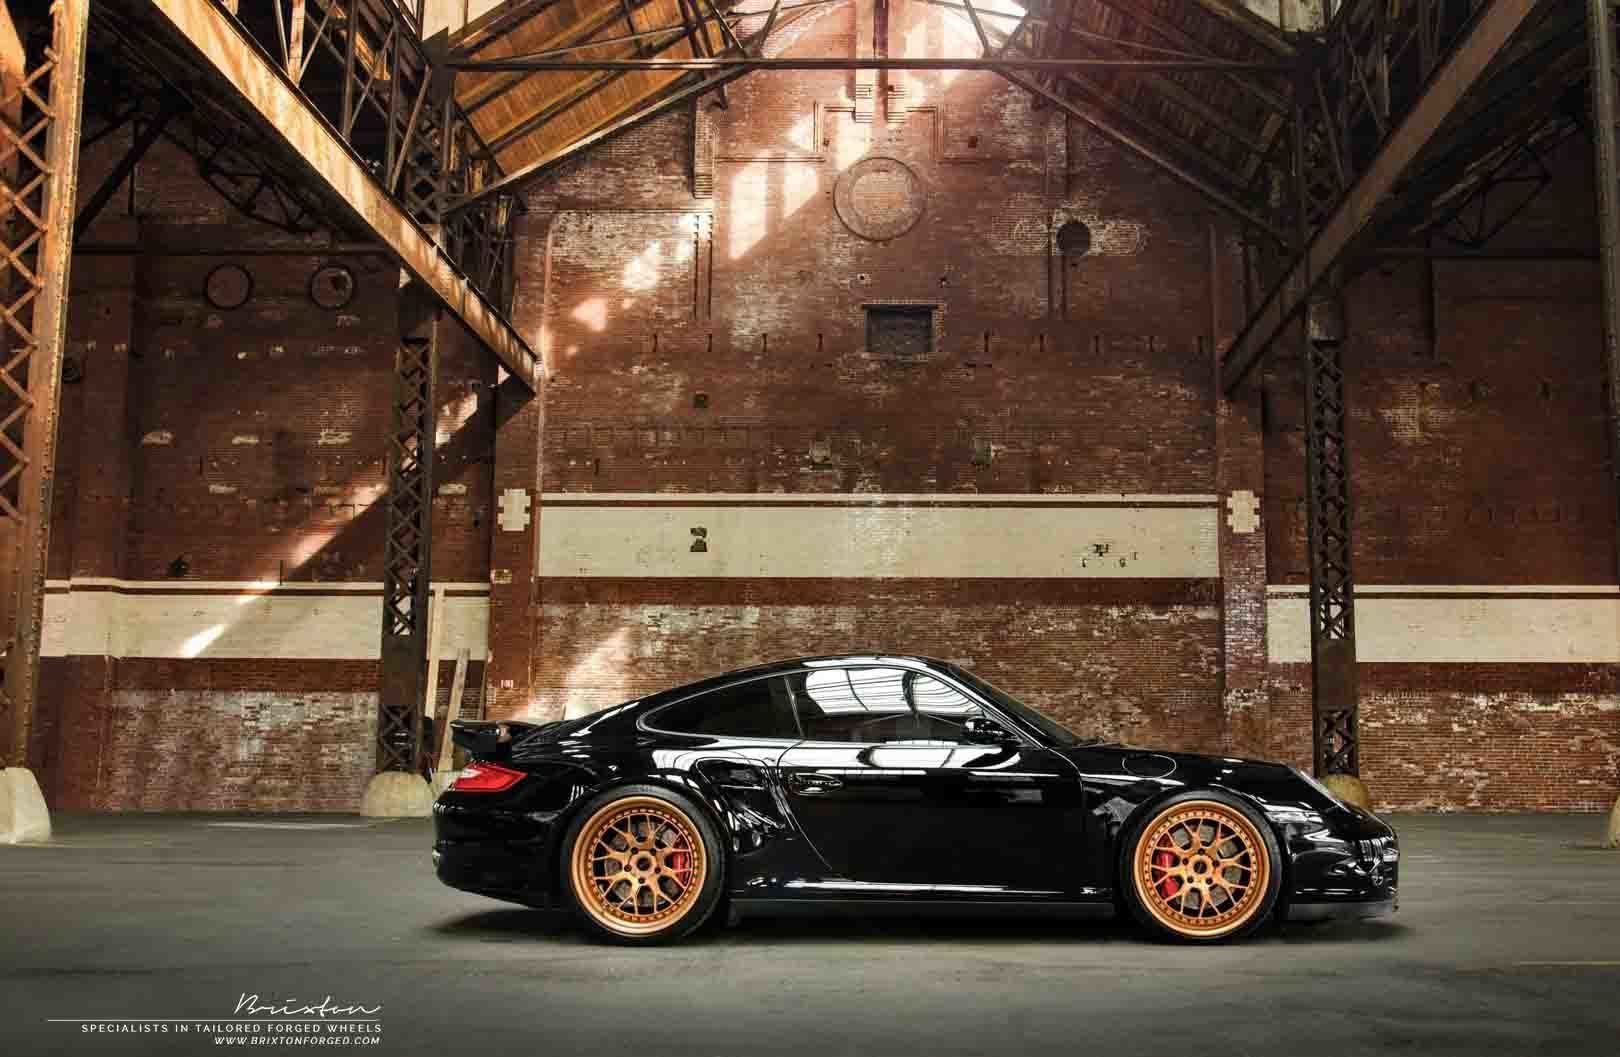 images-products-1-2692-232974980-black-porsche-997-turbo-brixton-forged-cm16-circuit-series-rose-gold-1800x1057.jpg